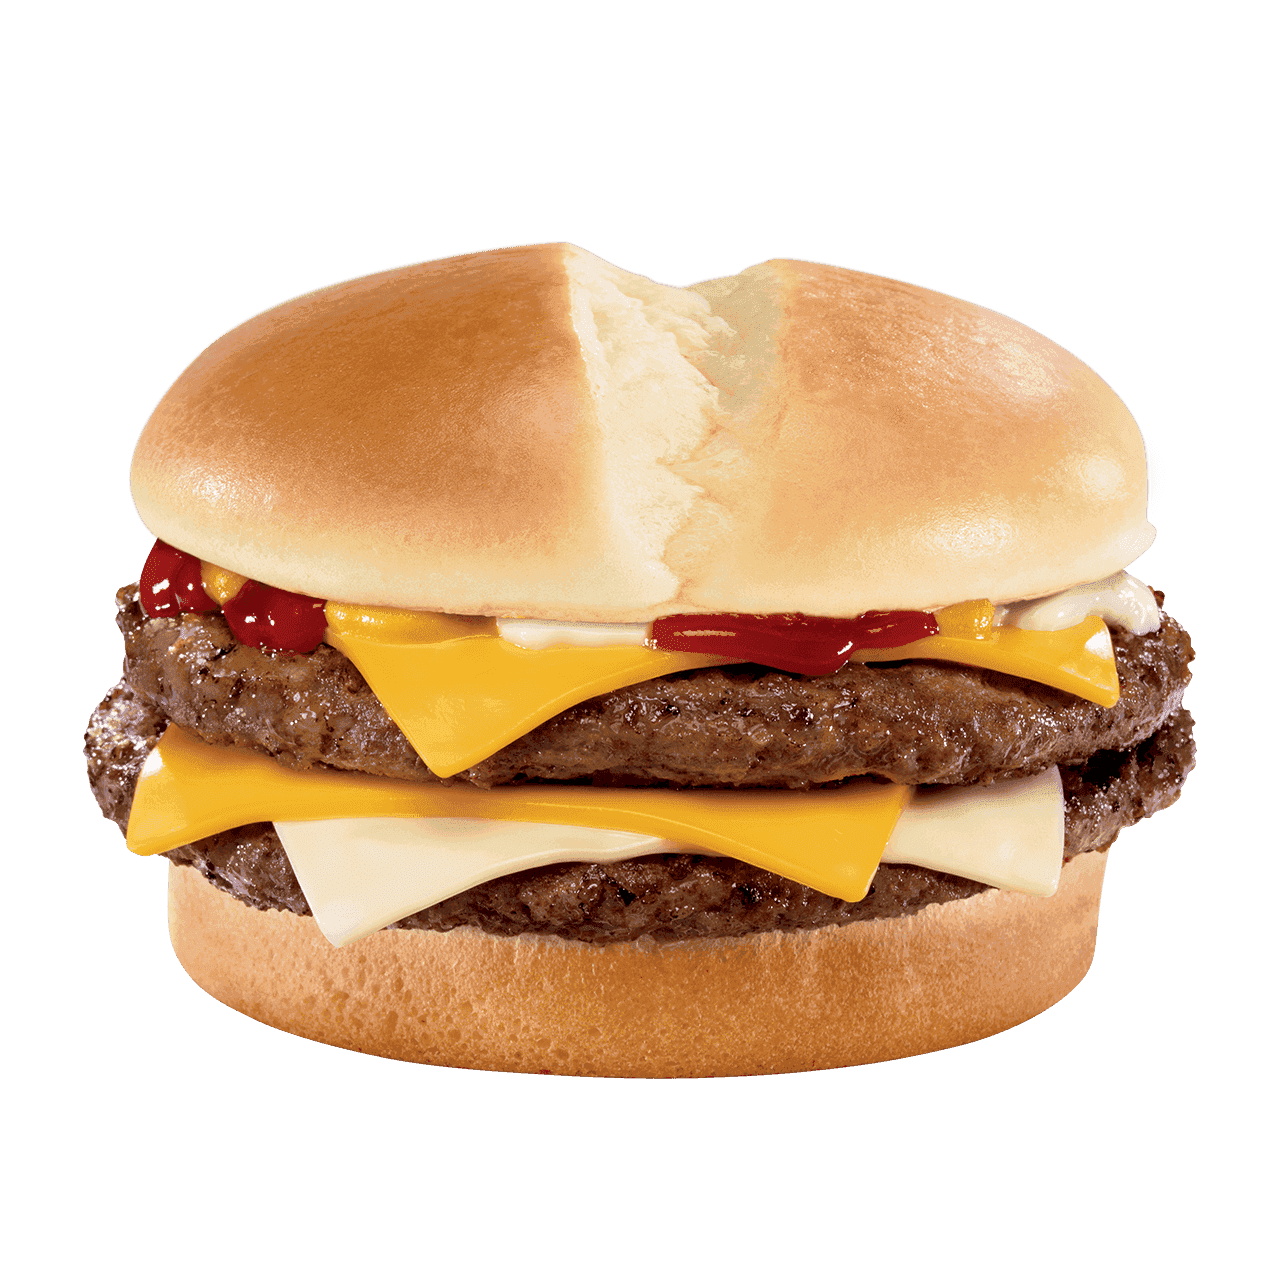 Calories in Jack in the box Ultimate Cheeseburger